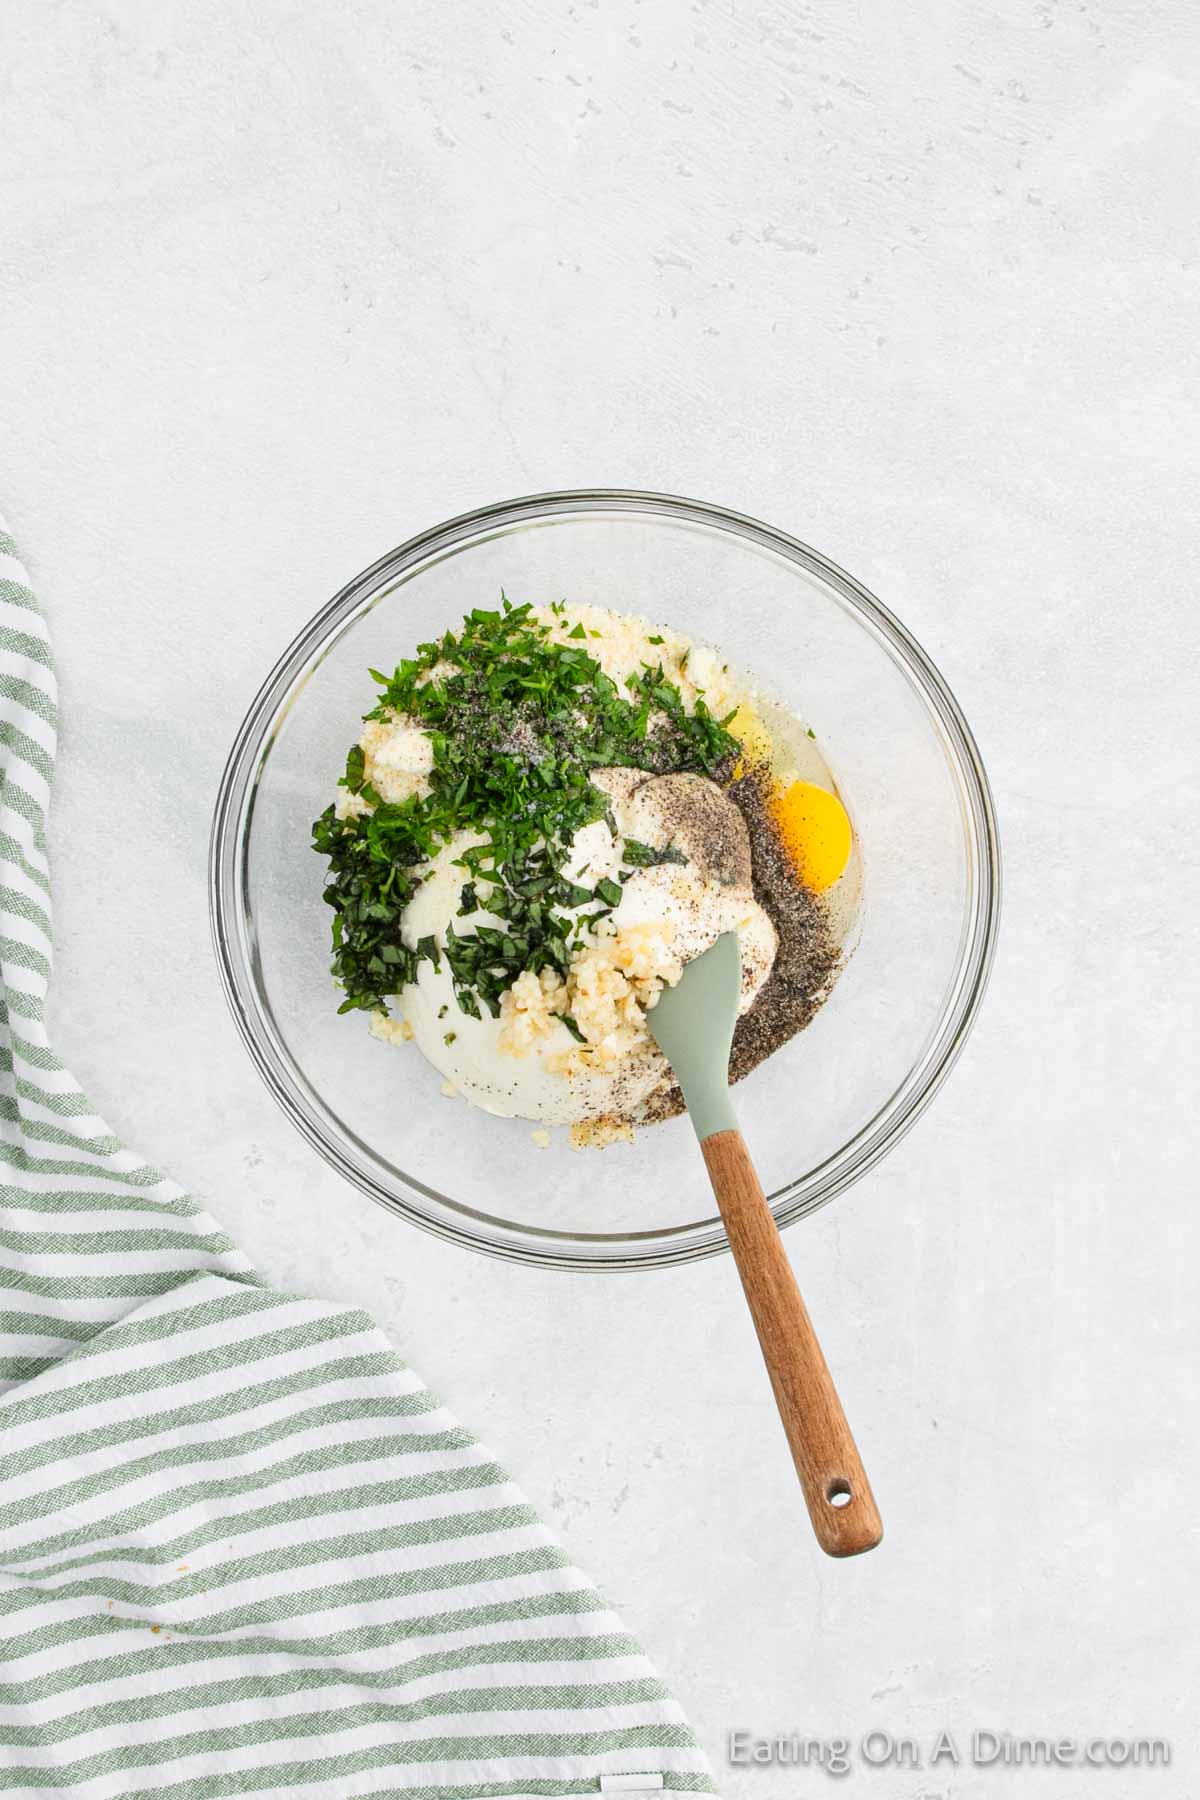 Combining the ricotta cheese, parmesan cheese, egg, garlic, parsley, basil leaves, salt and pepper in a bowl with spatula